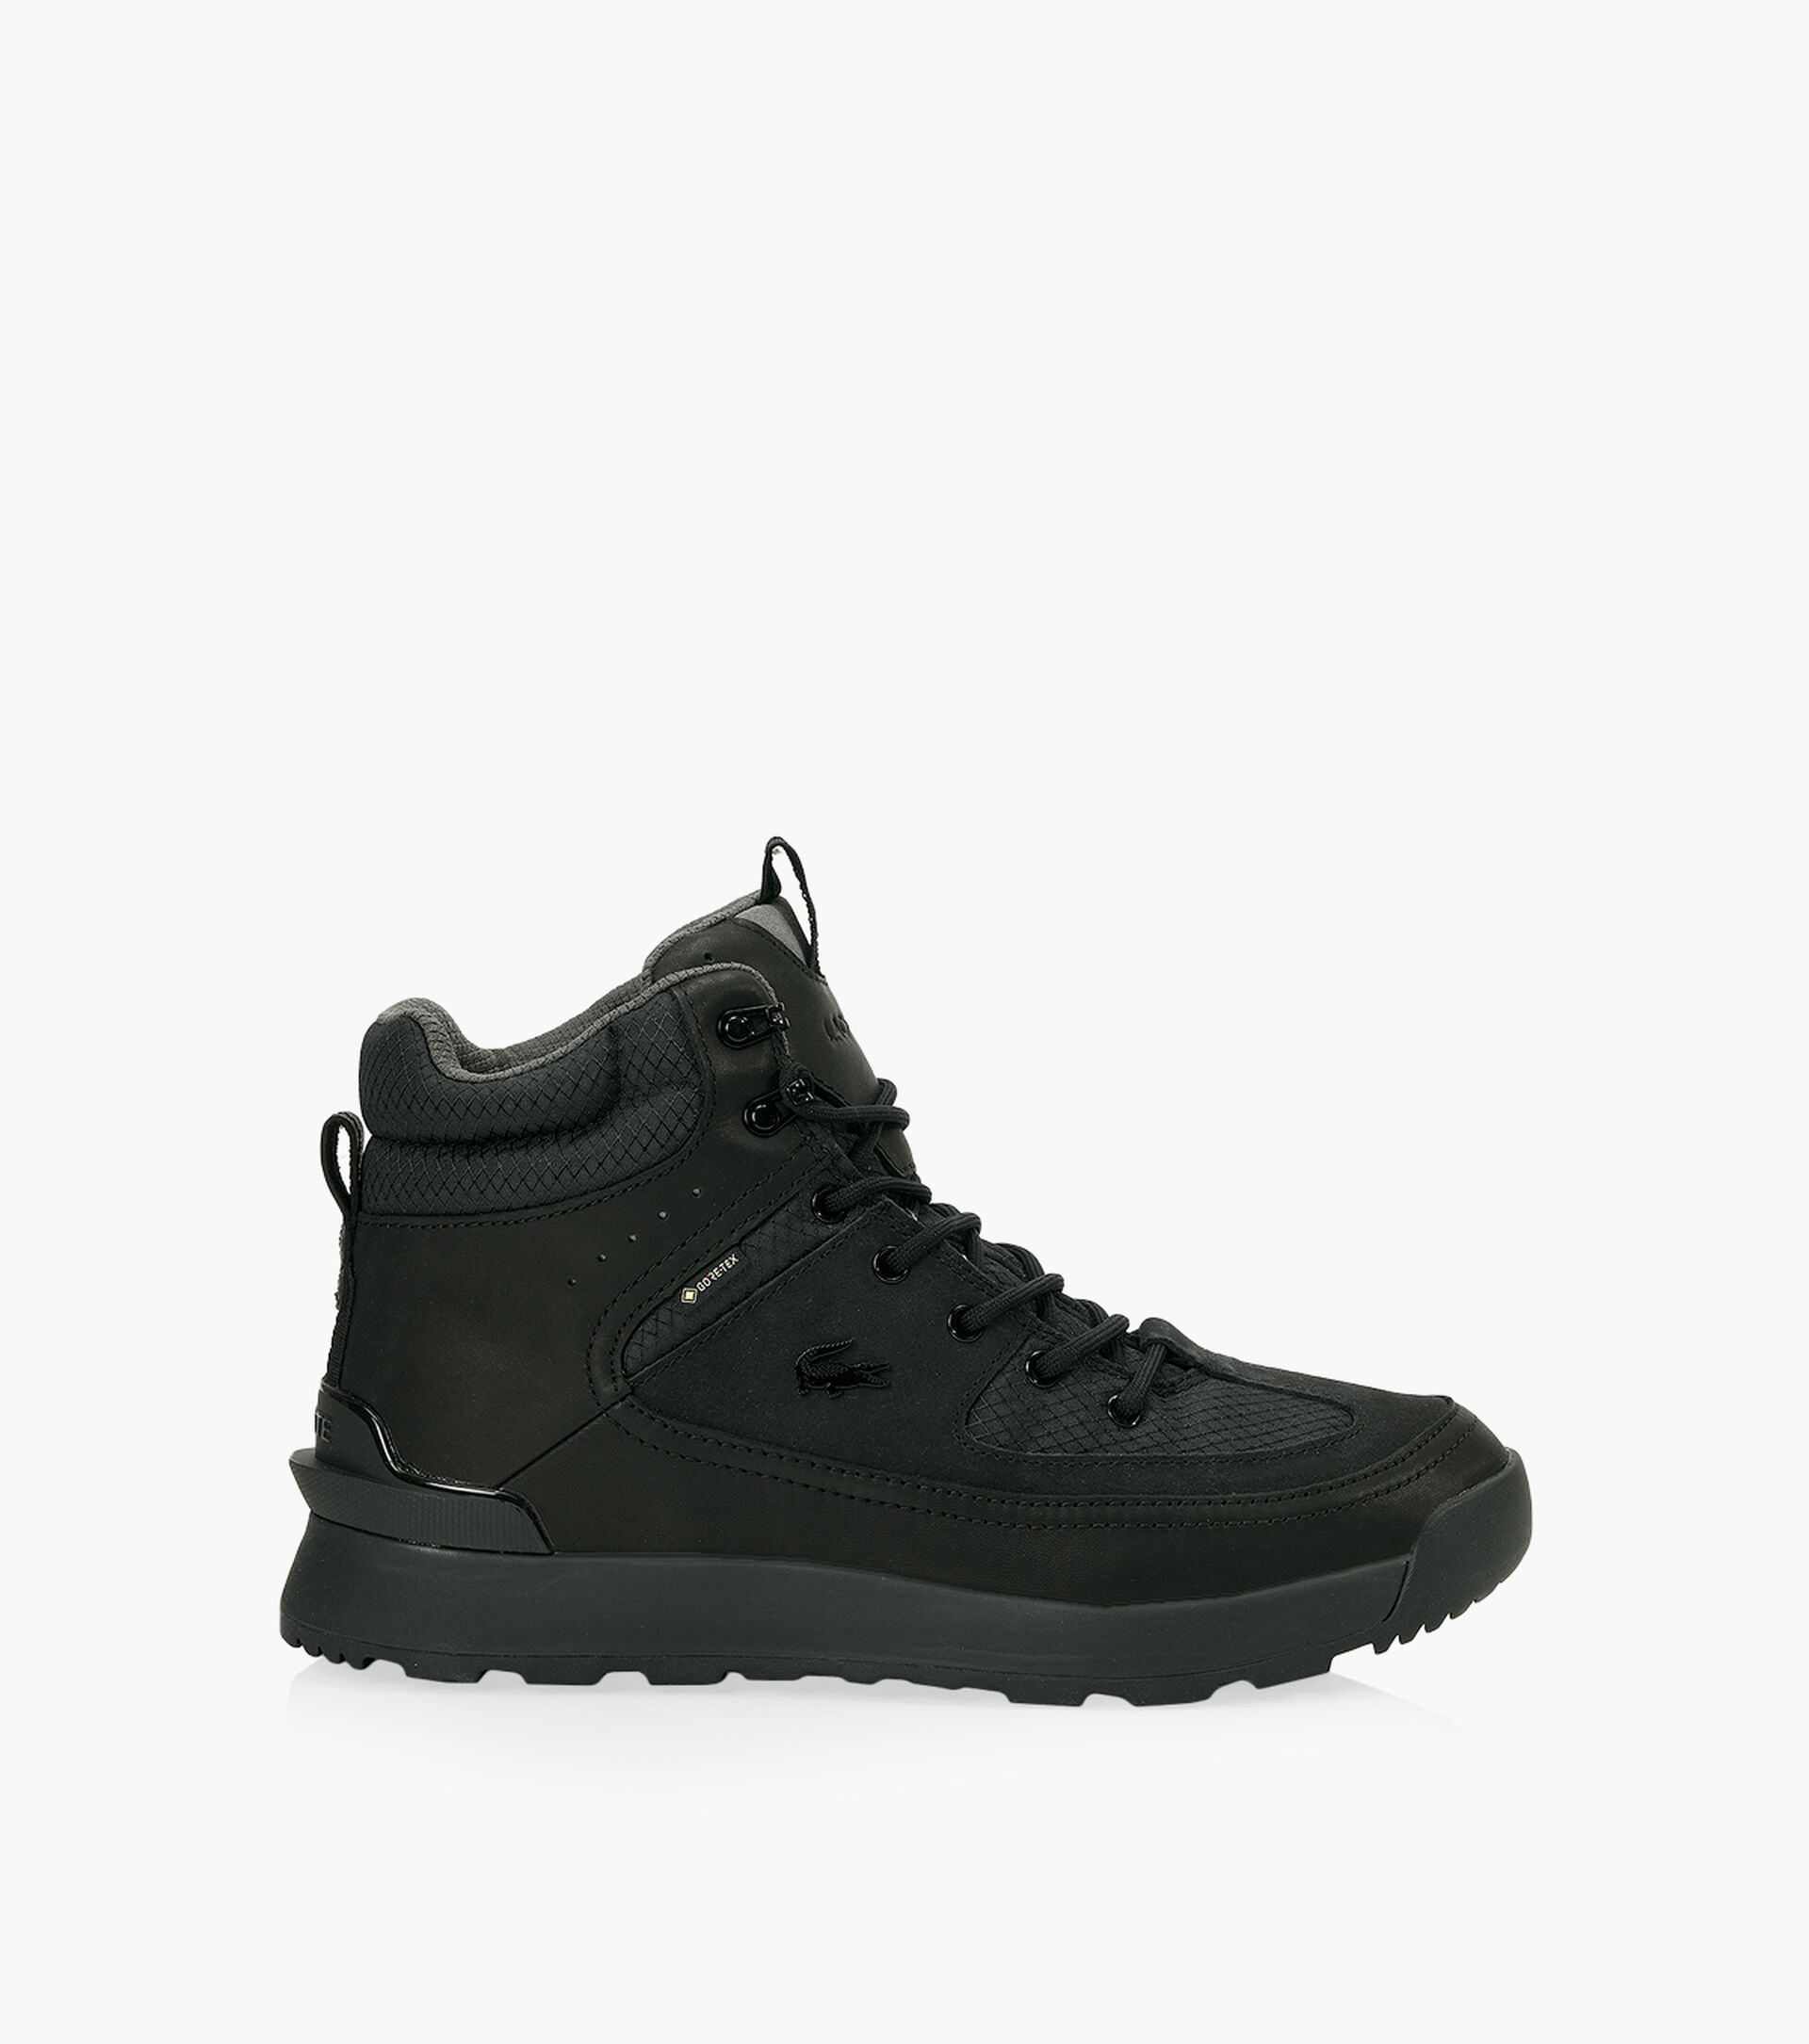 LACOSTE URBAN BREAKER GTX - Black Leather | Browns Shoes